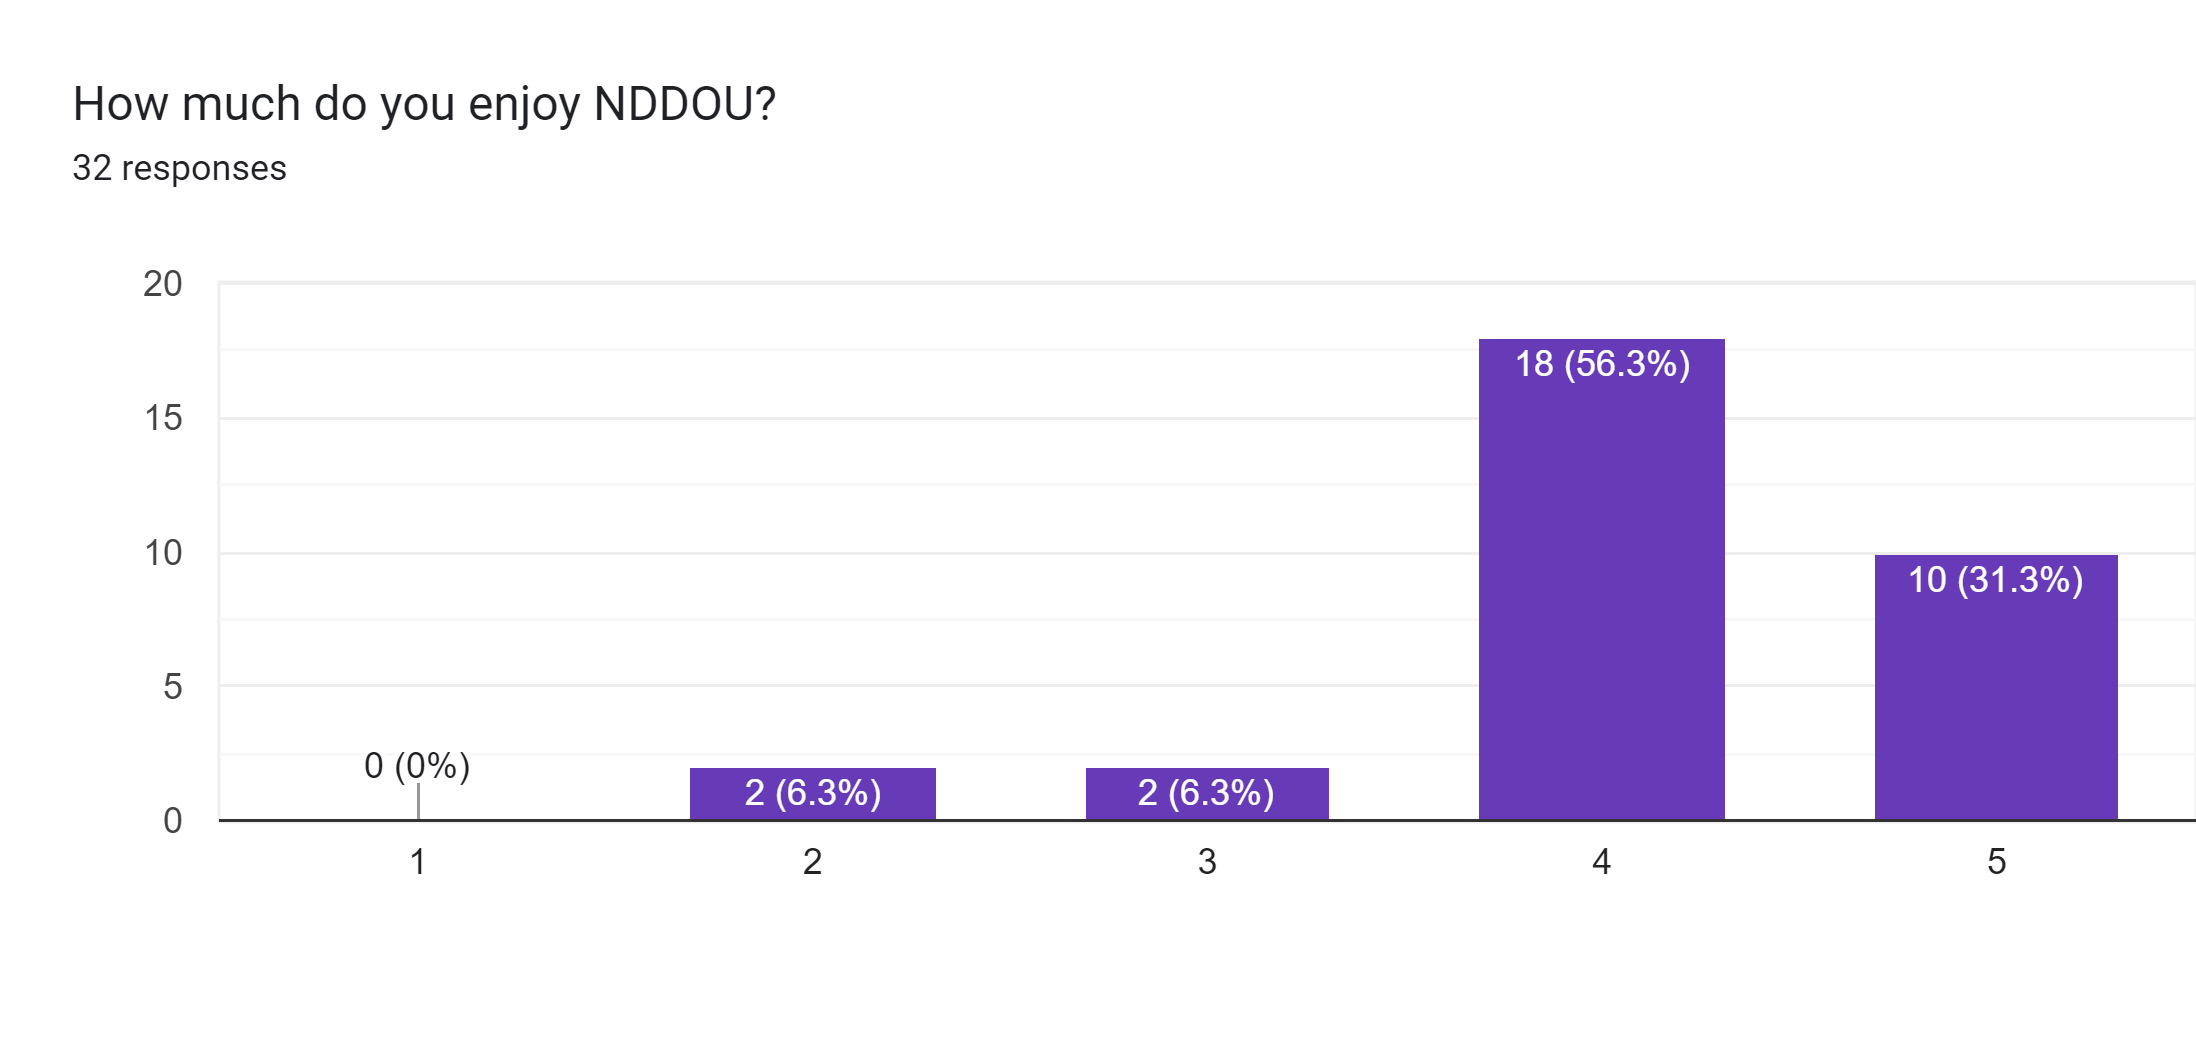 Forms response chart. Question title: How much do you enjoy NDDOU?. Number of responses: 32 responses.